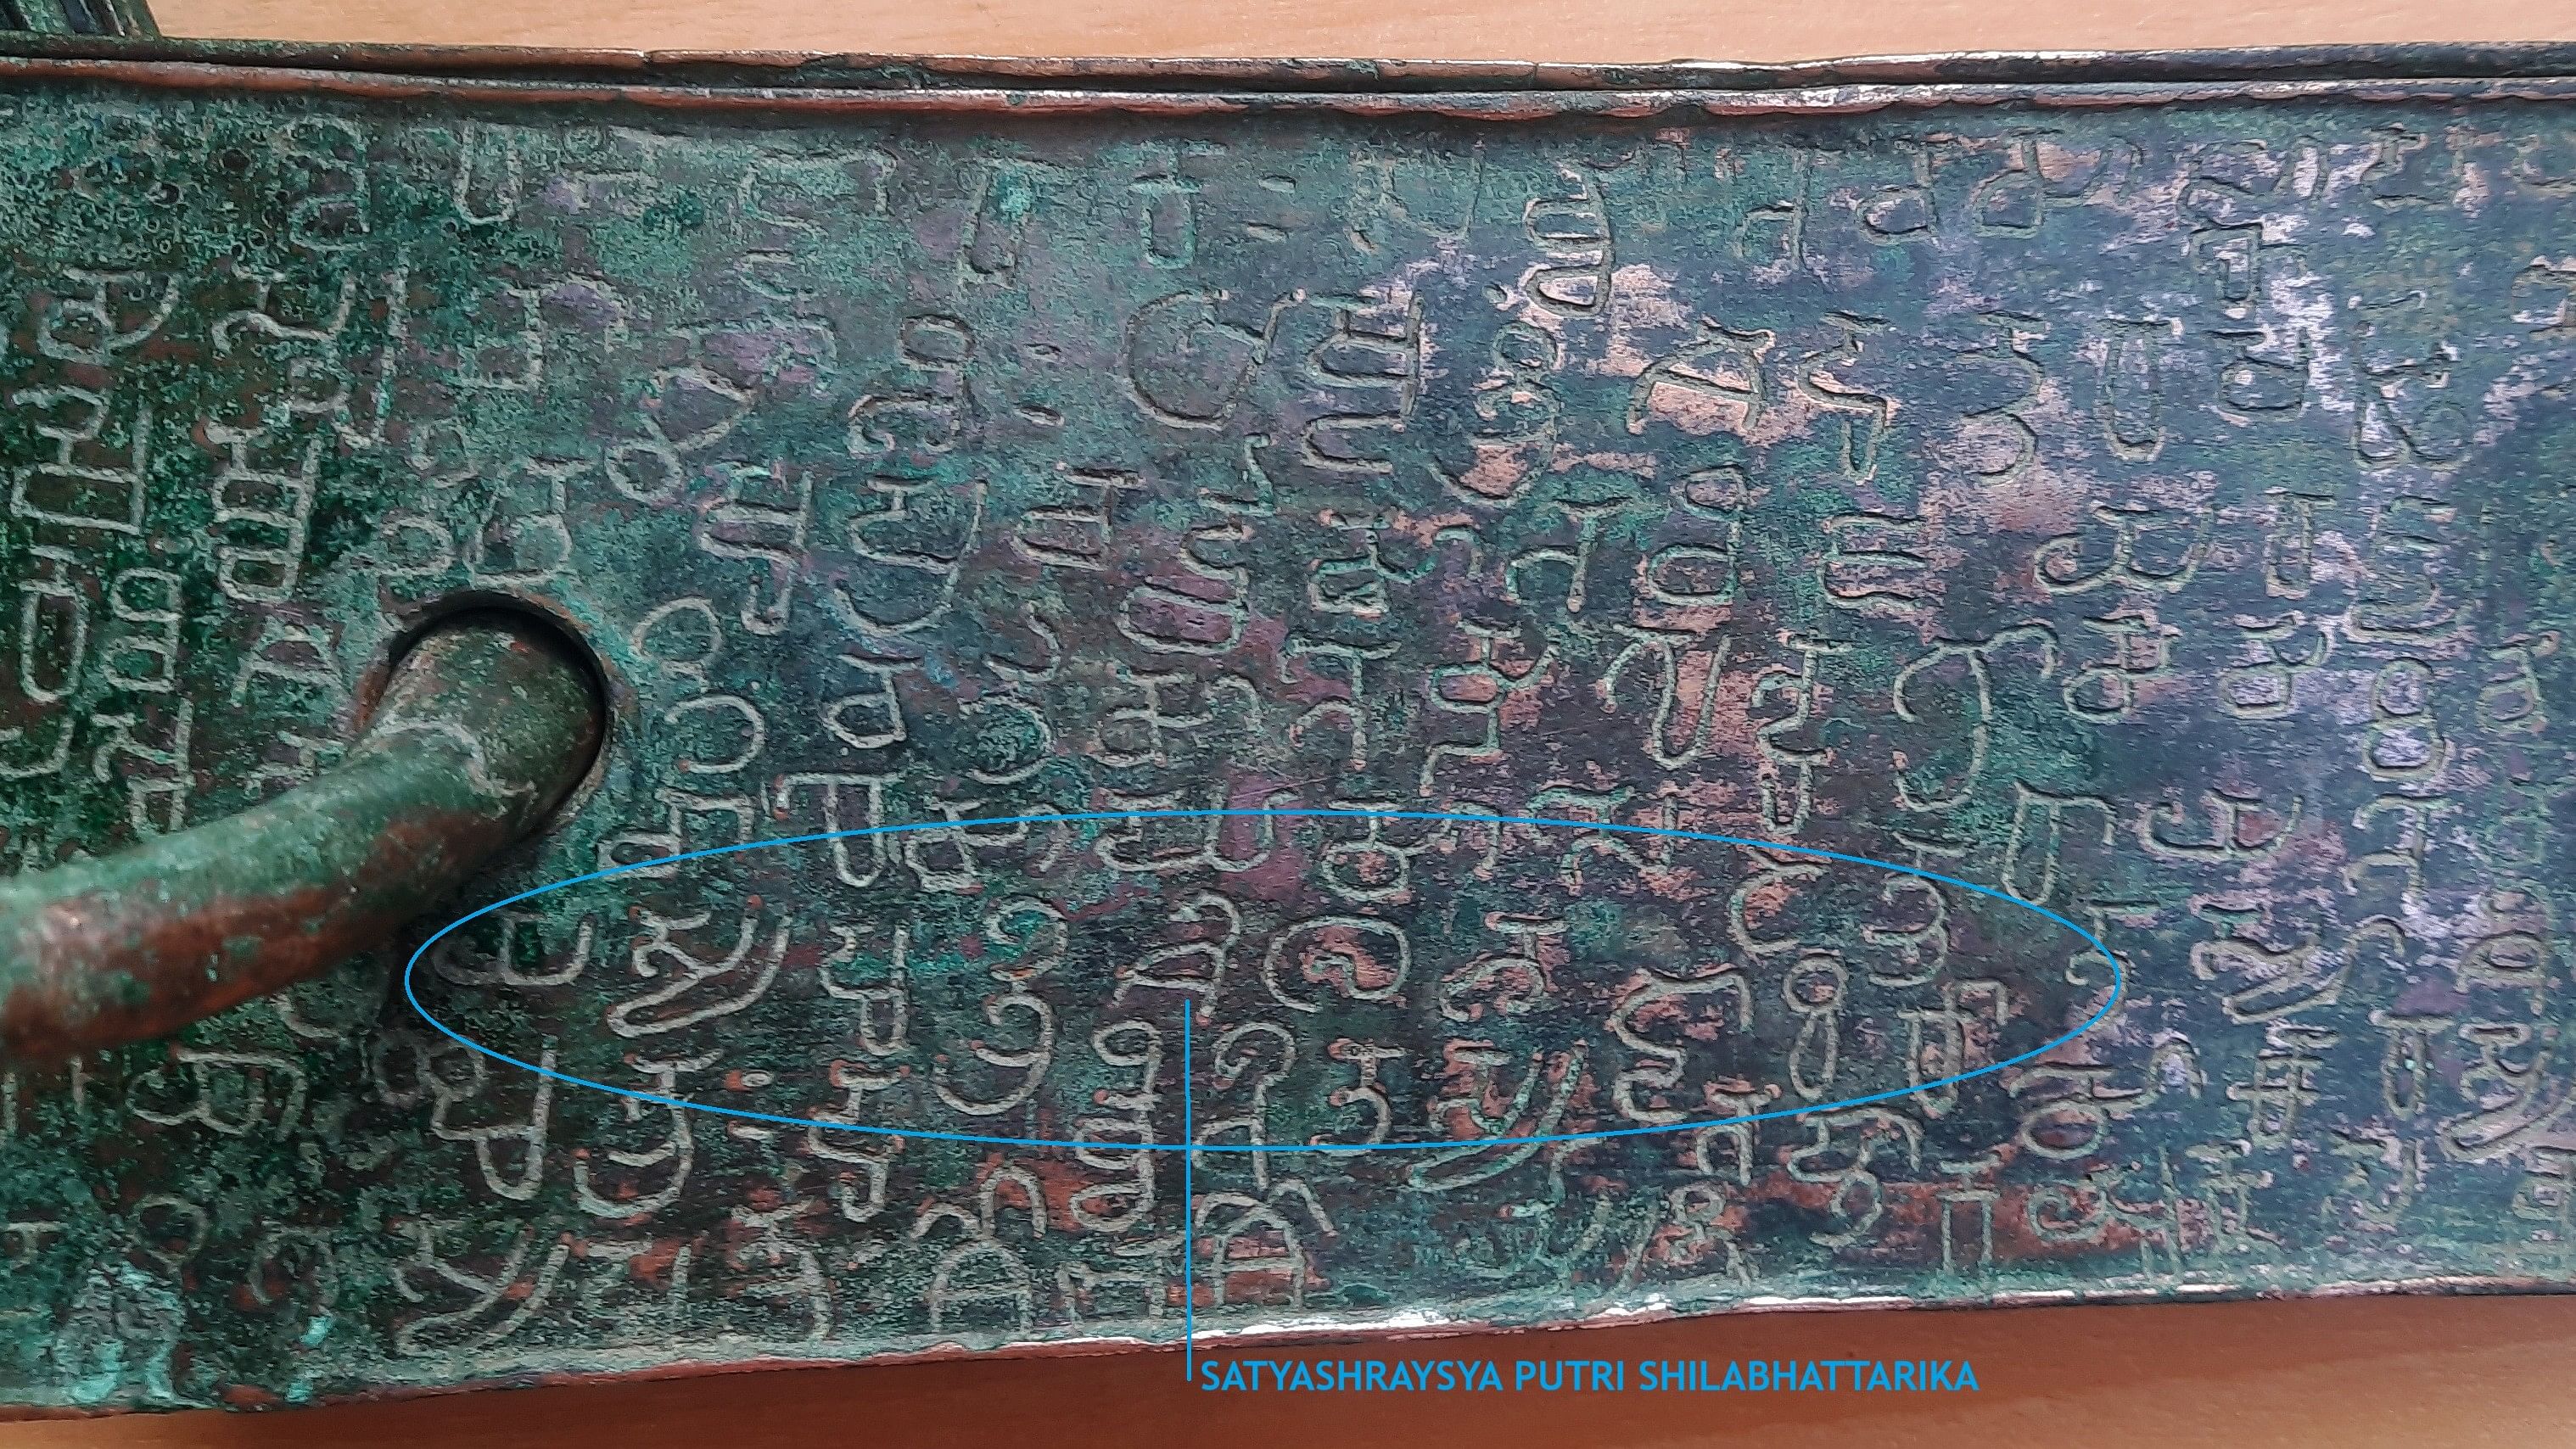 Views of the inscription which mentions Shilabhattarika.